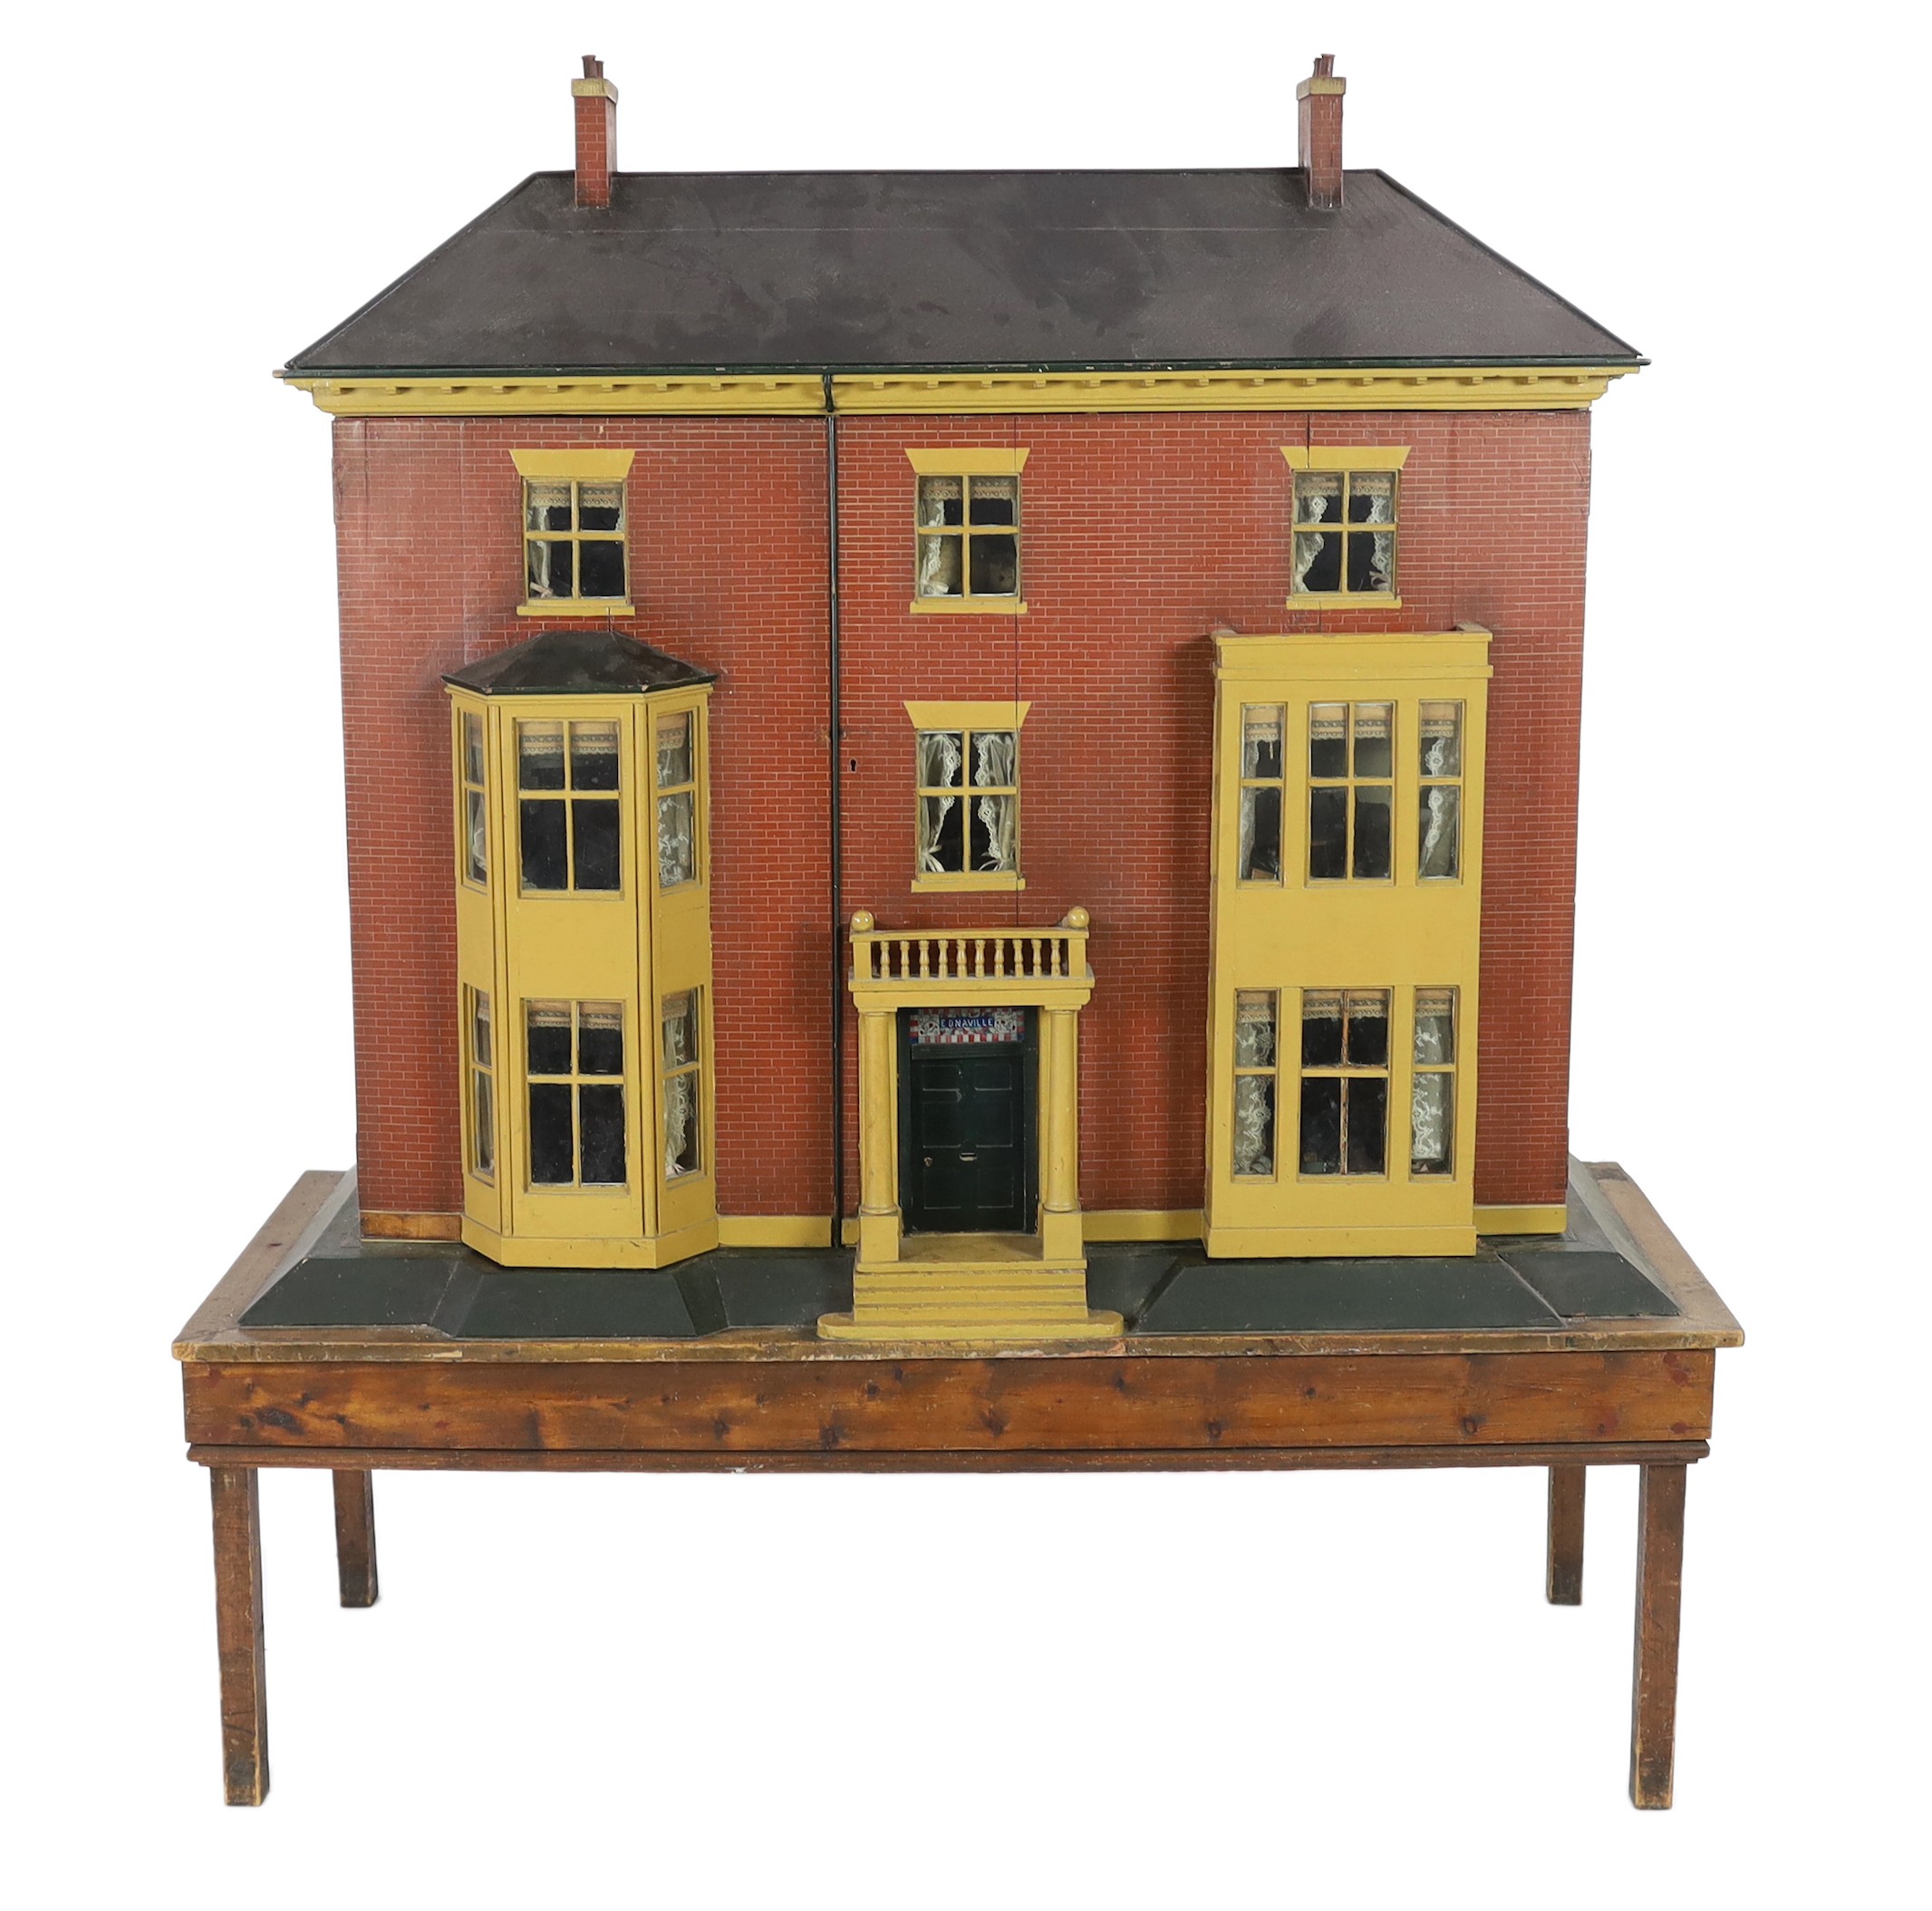 'Ednaville': A fine fully furnished Victorian dolls' house, circa 1880-1900                                                                                                                                                 